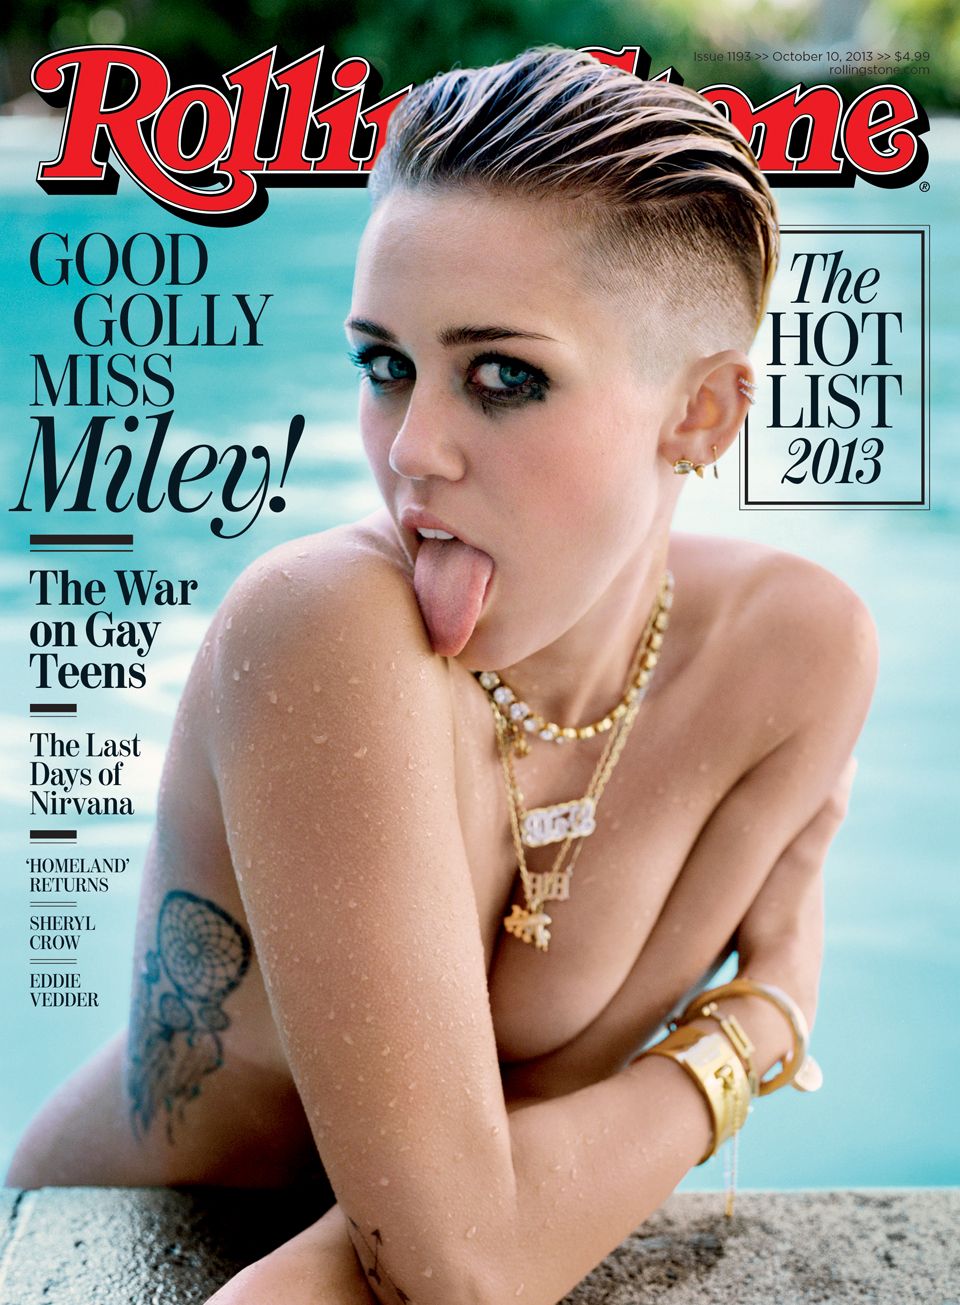 Miley Cyrus poses naked for Rolling Stone pic